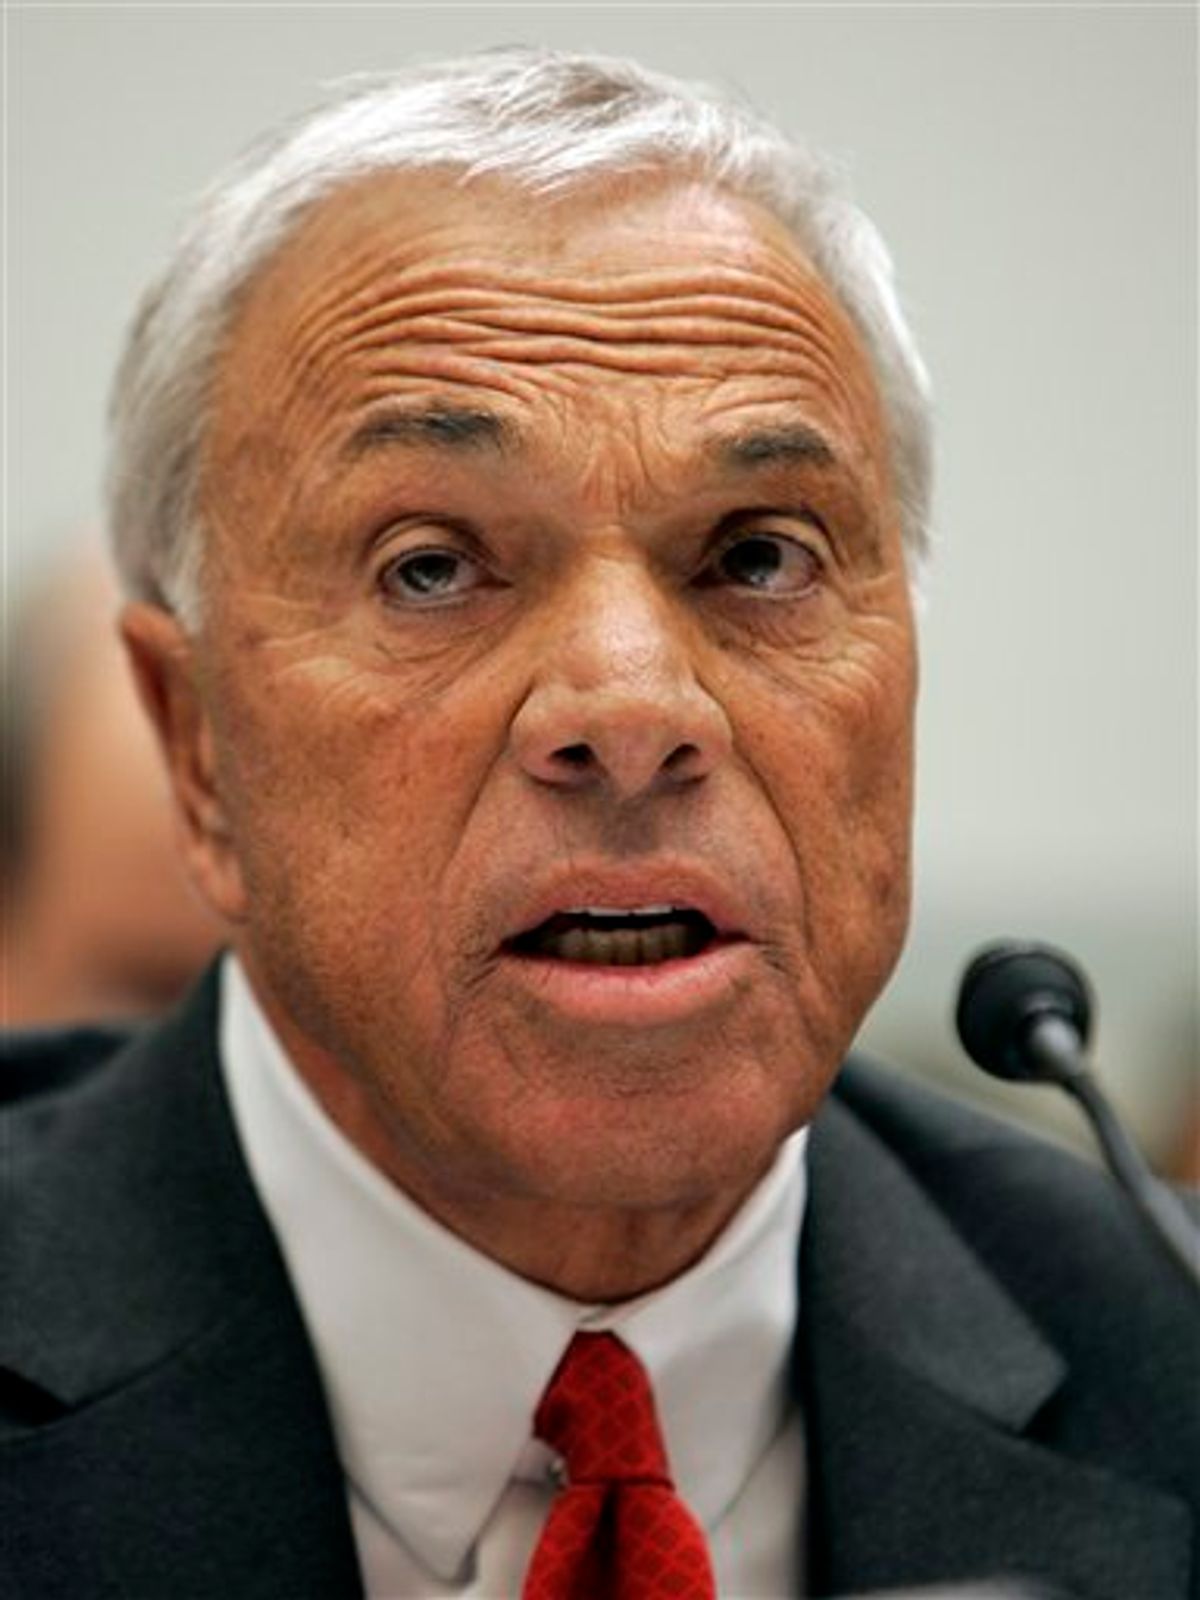 FILE - This March 7, 2008 file photo shows Angelo Mozilo, founder and former CEO of Countrywide Financial Corporation, testifying before the House Oversight and Government Reform Committee hearing on Capitol Hill in Washington.  A judge ruled Friday Oct. 8, 2010 that federal regulators in an upcoming trial can use a message written by Mozilo, in which he called himself a "magnet" for prosecution. (AP Photos/Susan Walsh, File) (AP)